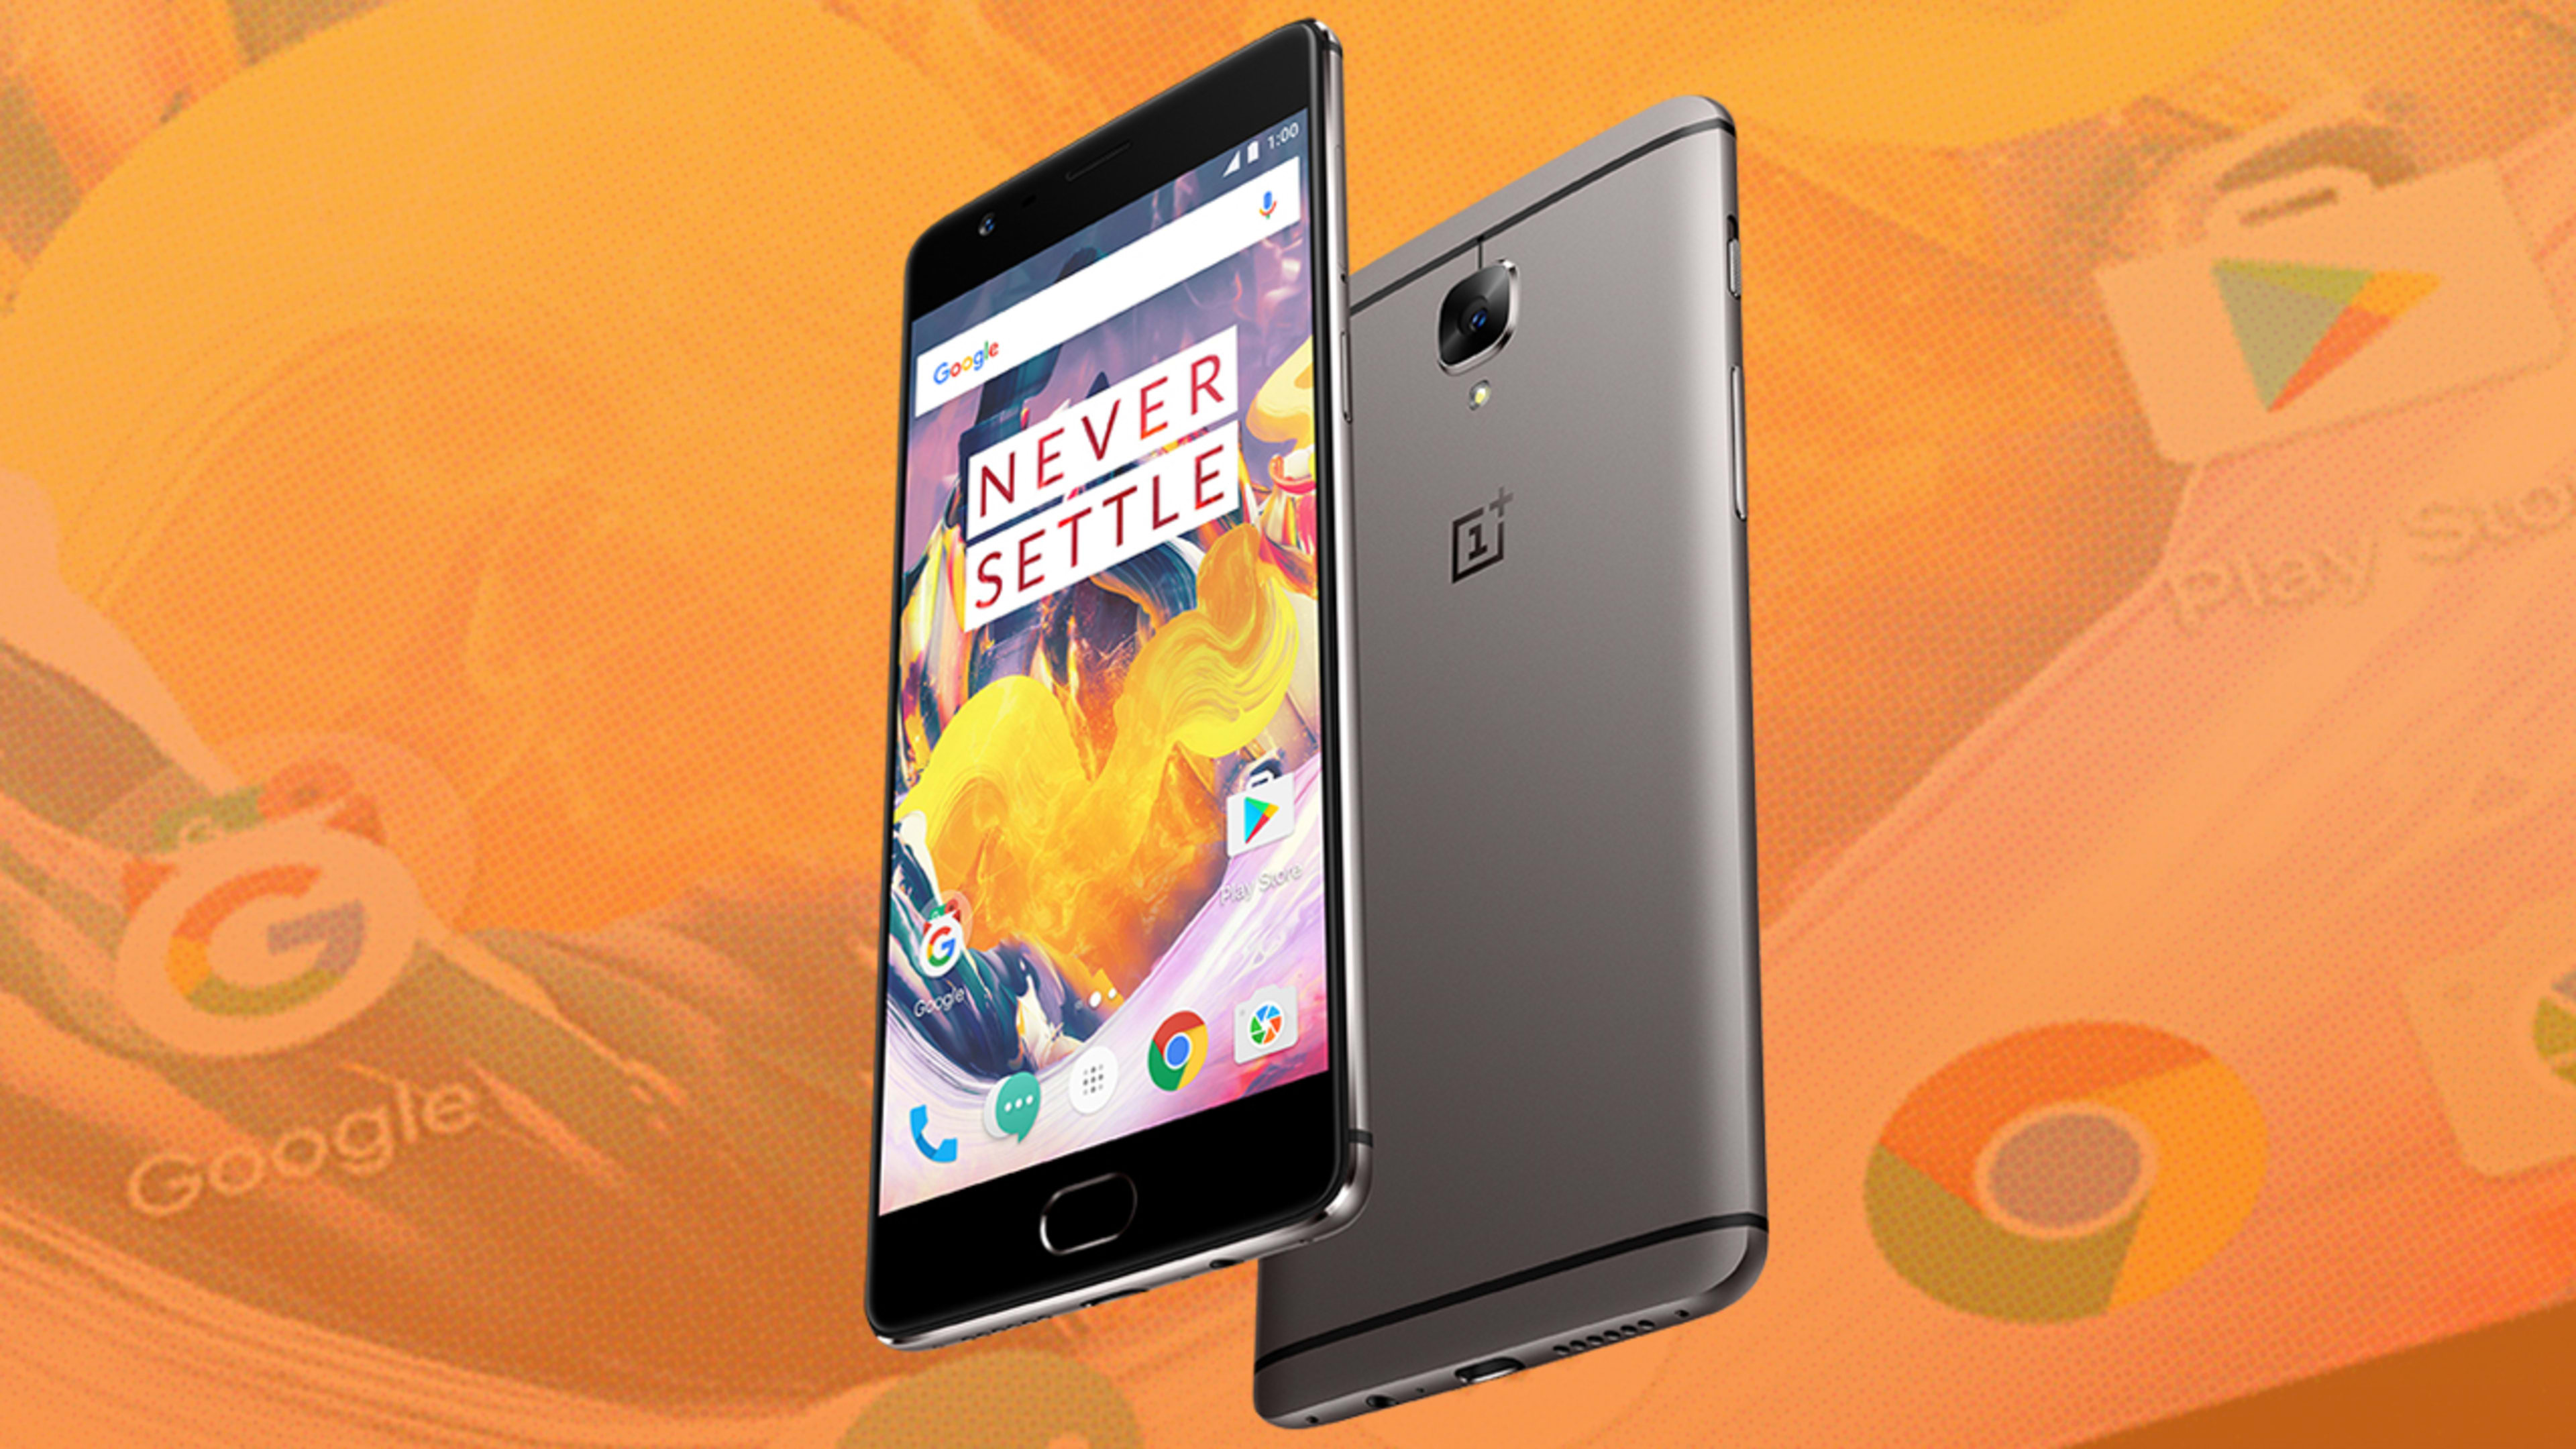 The OnePlus 3 Gets A Speedy Revision With The New OnePlus 3T